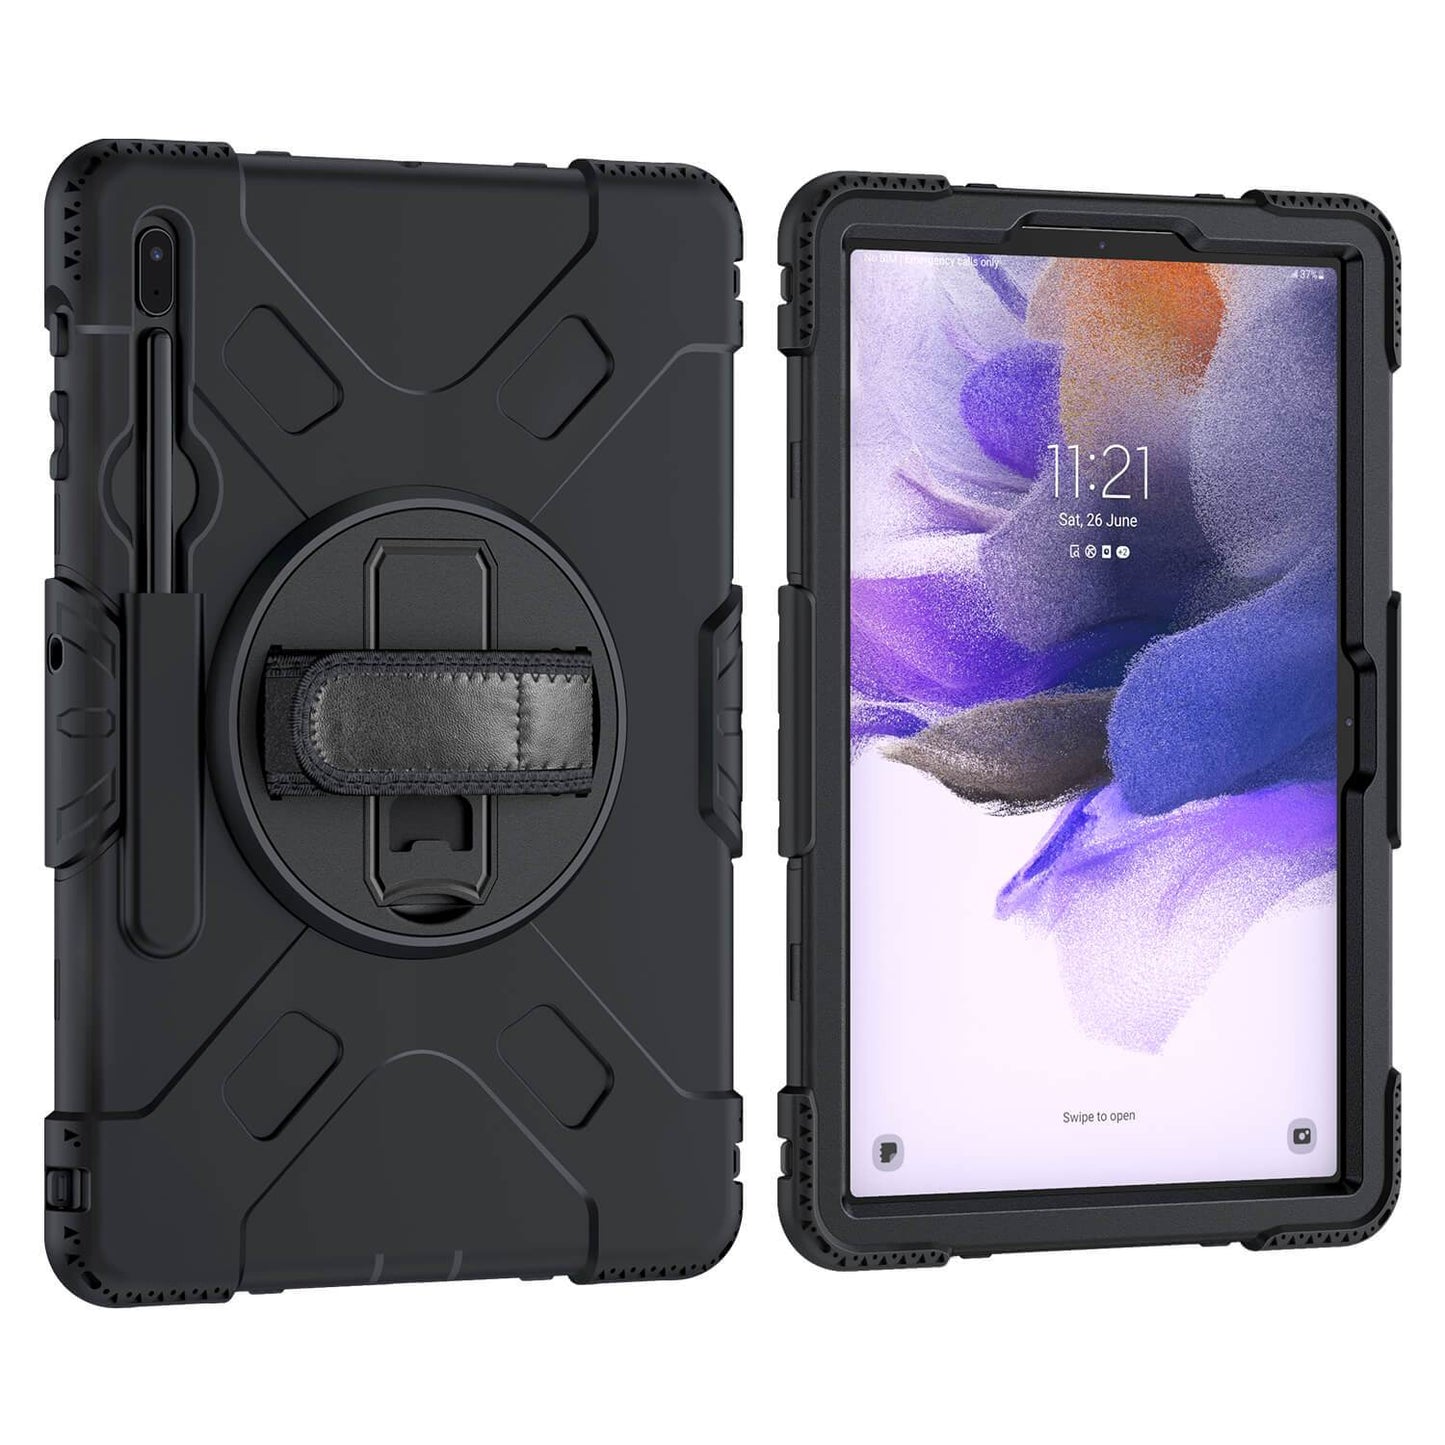 Tough on Samsung Galaxy Tab S7 FE Case Rugged Protection Black - Toughonstore